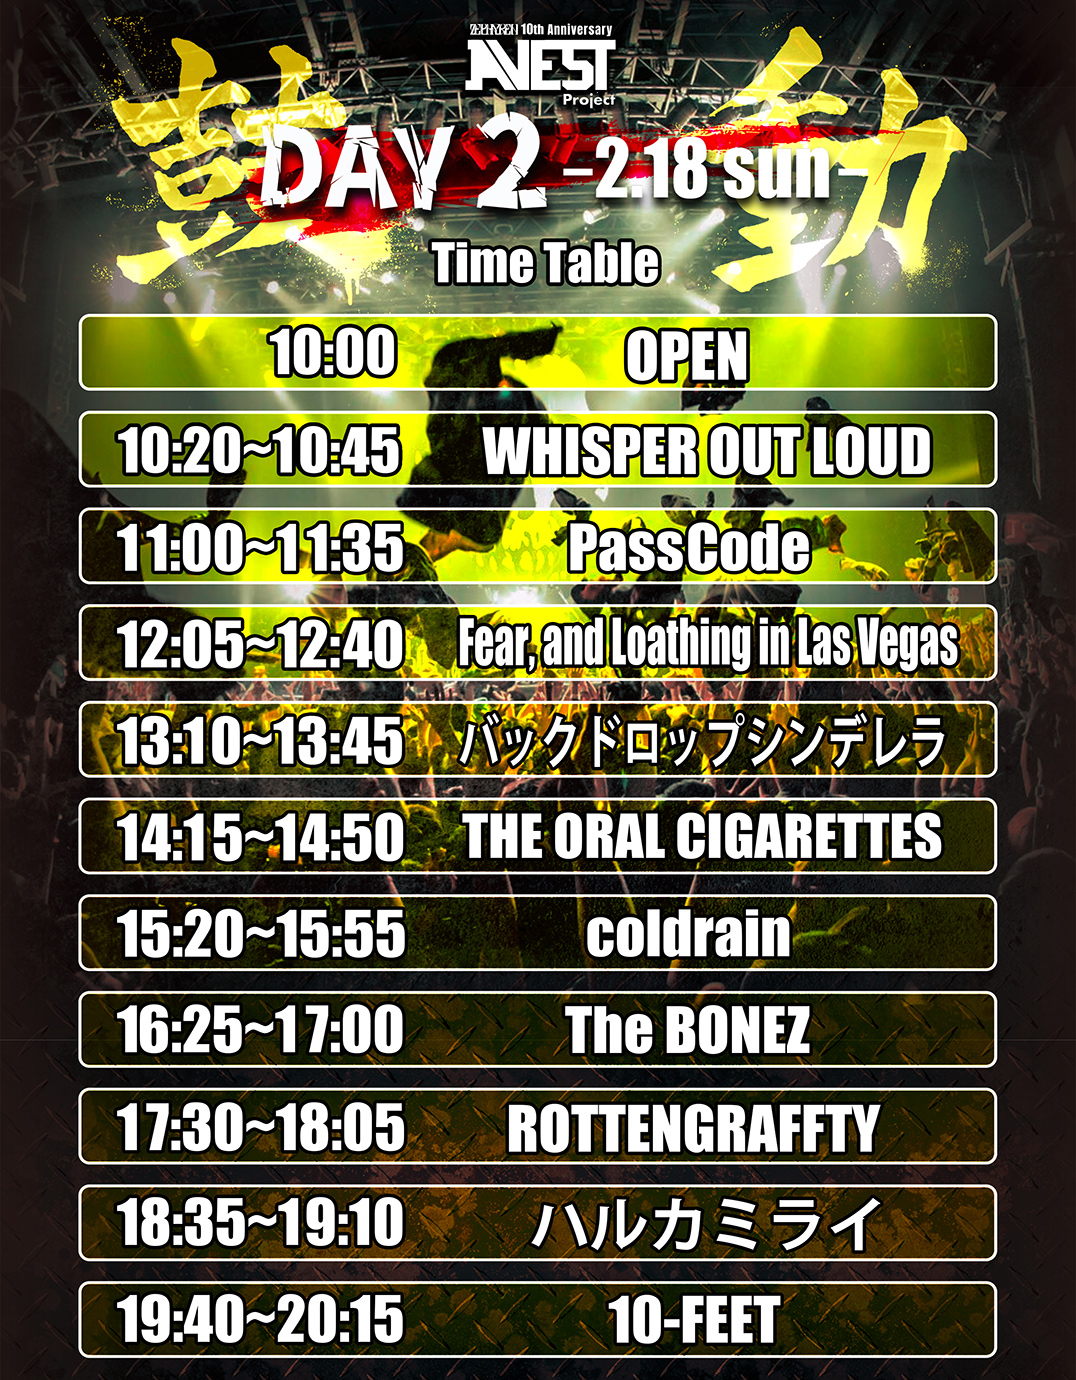 TIME TABLE DAY 2